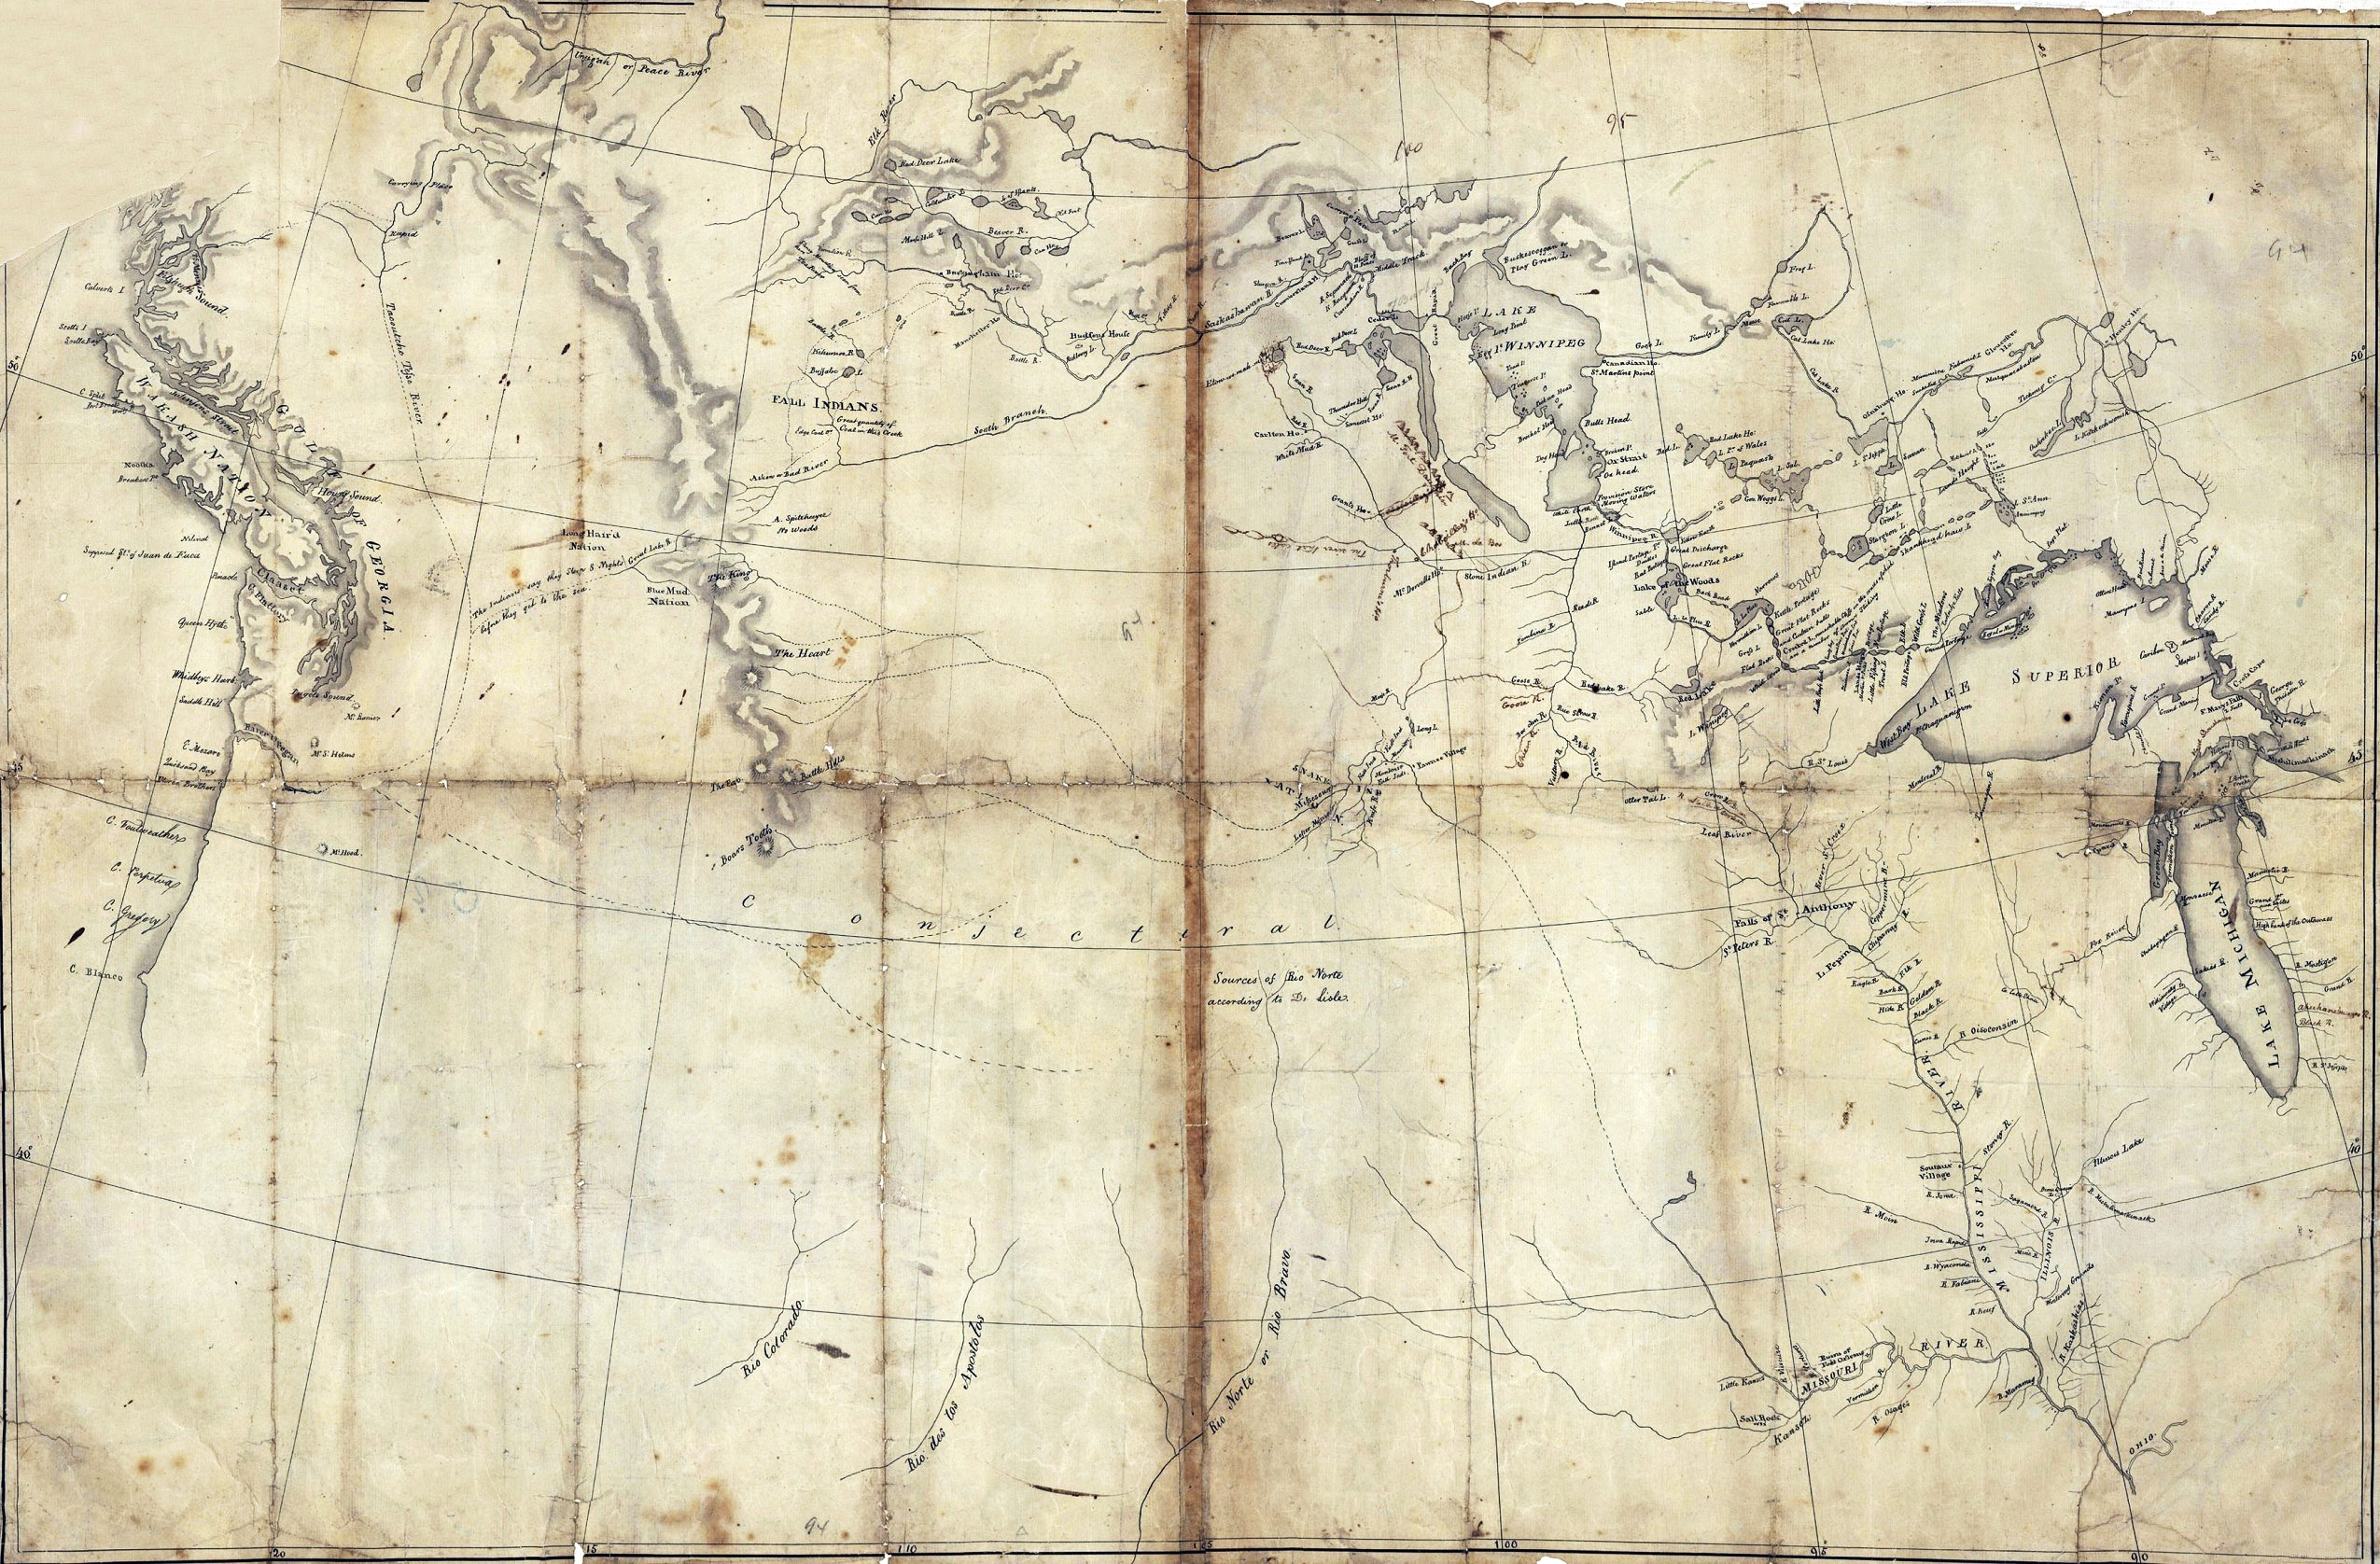 1803 Lewis and Clark map, annotations in brown by Meriwether Lewis, tracing Mississippi and Missouri Rivers, Lakes Michigan, Superior, and Winnipeg, onwards to the Pacific. by Nicholas King, ca.1803; Shutterstock ID 239398342; Job: Lewis and Clarke ; PO: Seasons 04 2016